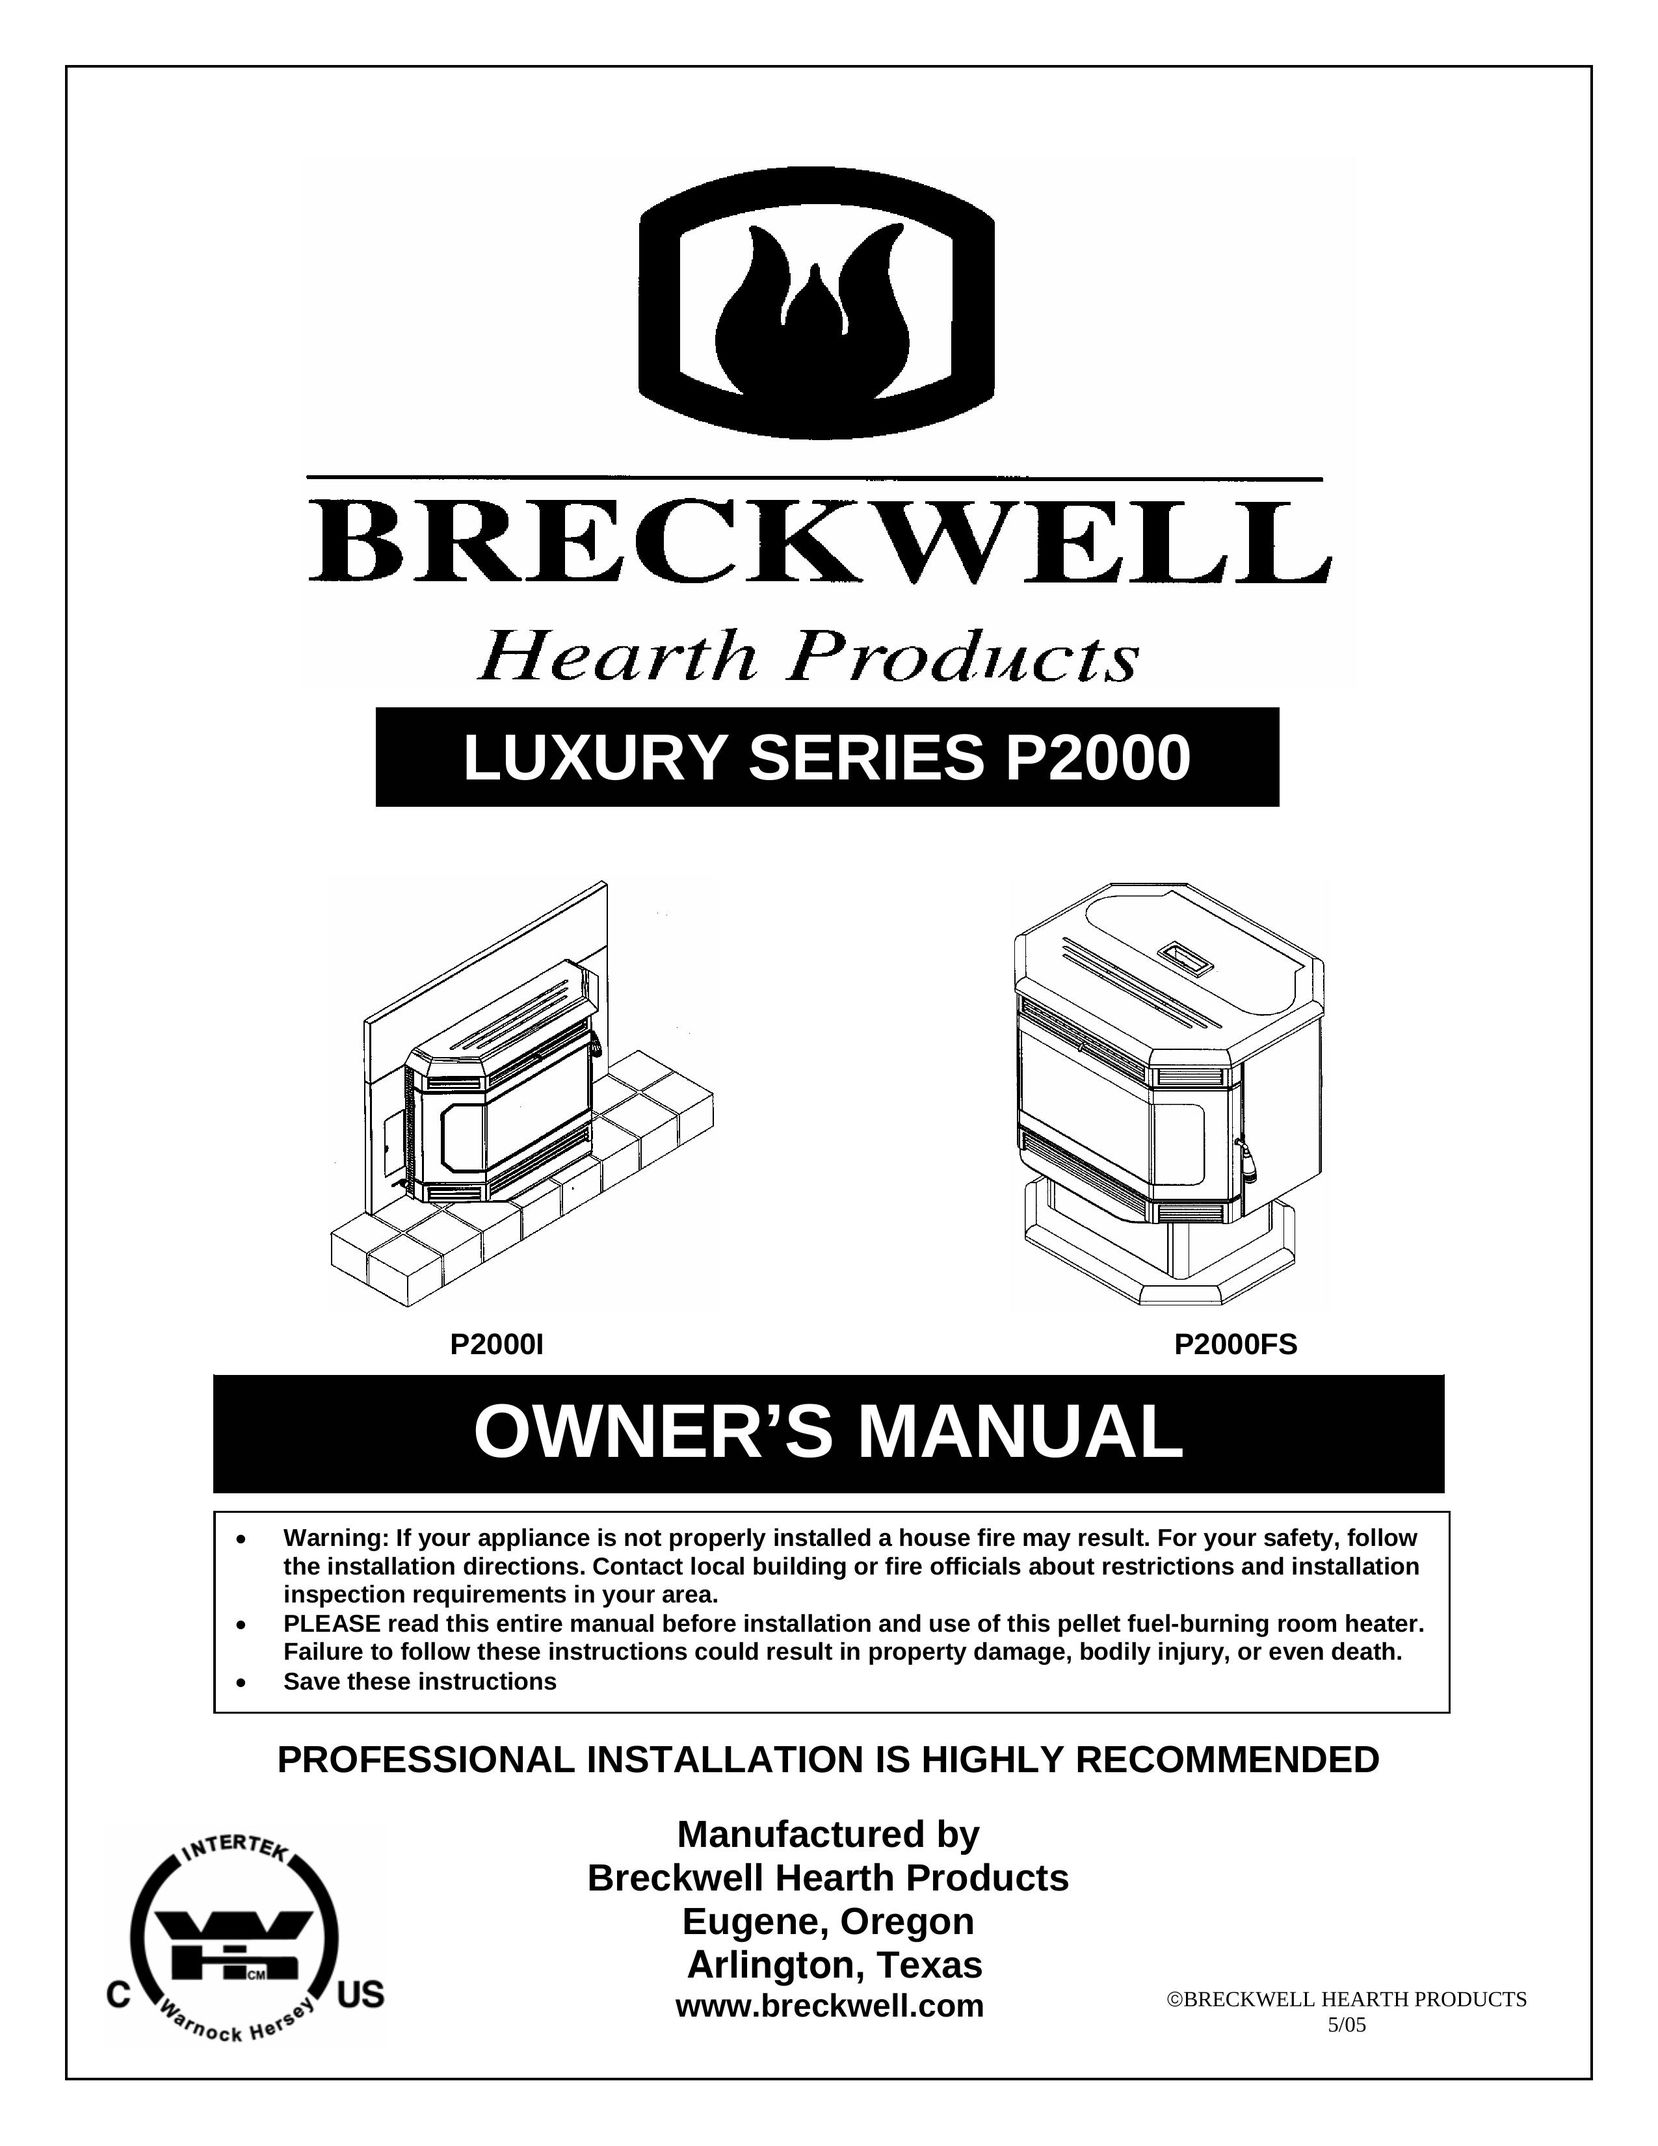 Breckwell P2000FS Indoor Fireplace User Manual